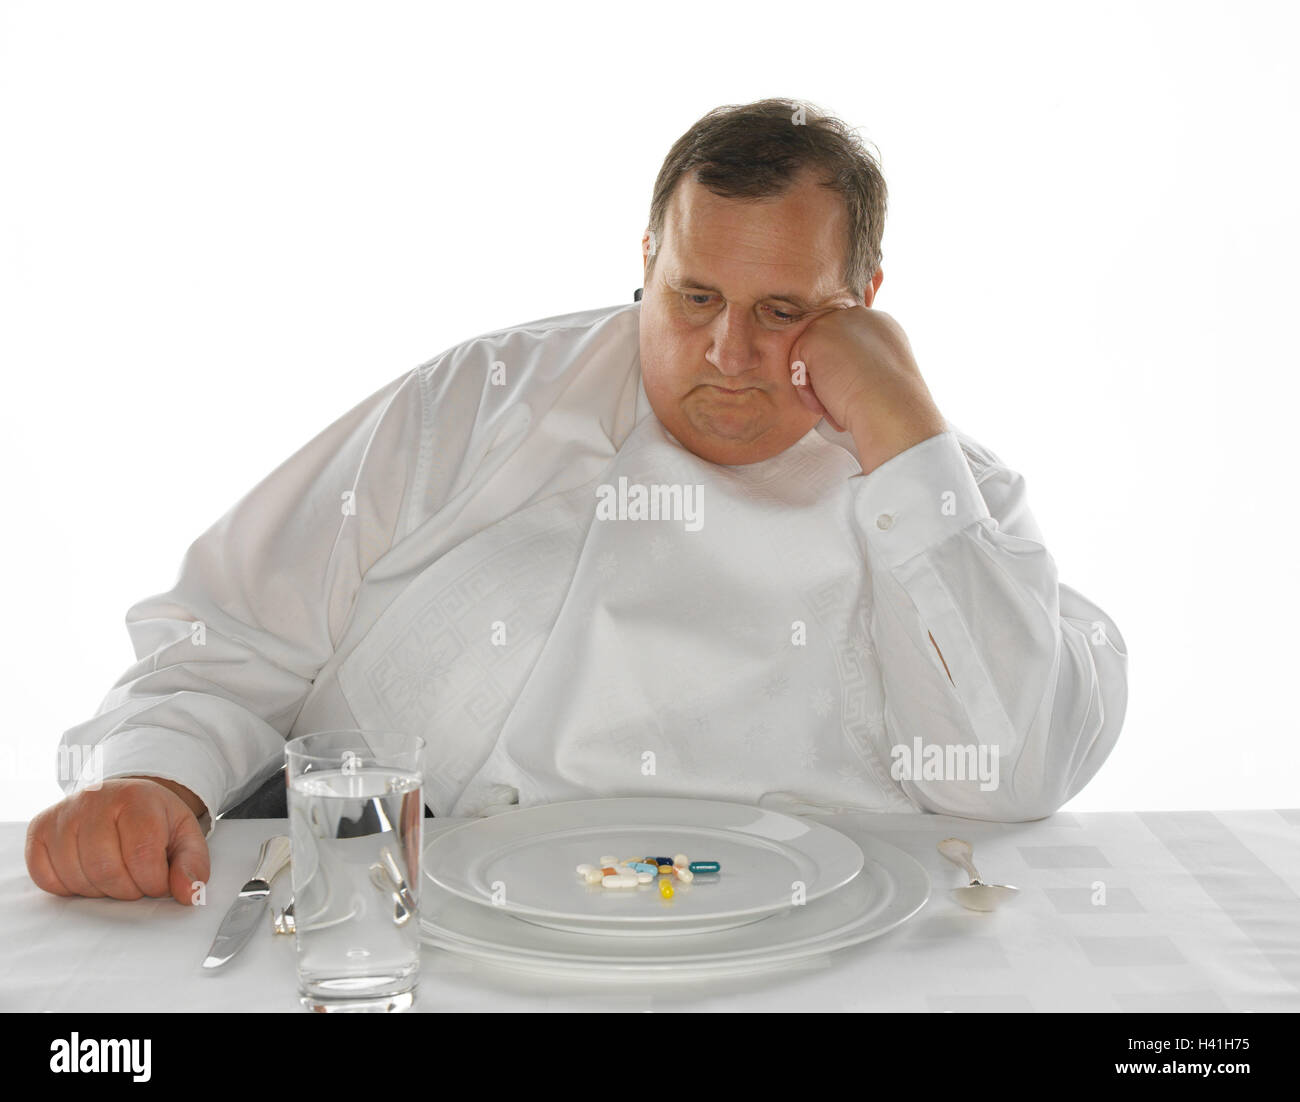 Diet, man, overweight, plate, drugs, look, add support thoughtful middle old person, thickly, bold, overweight, unhealthily, injuriously, adiposity, obesity, fatly, obesity, health risk, head, table, dining table, covered, glass, water, water glass, cover Stock Photo